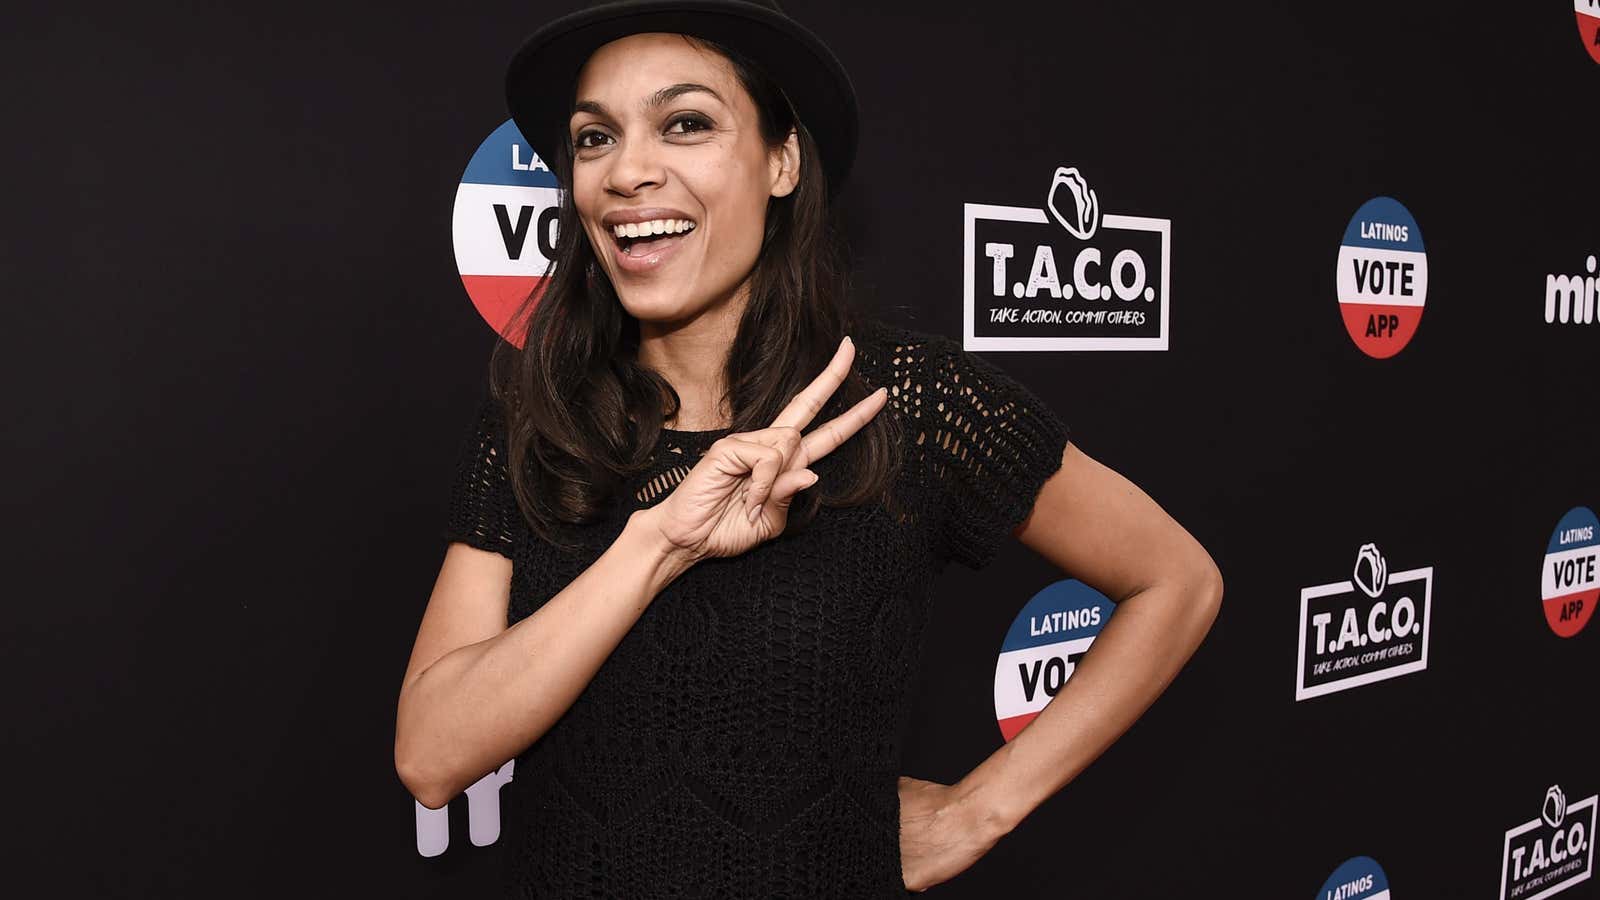 Actress Rosario Dawson at Mitú’s voter registration event in May.